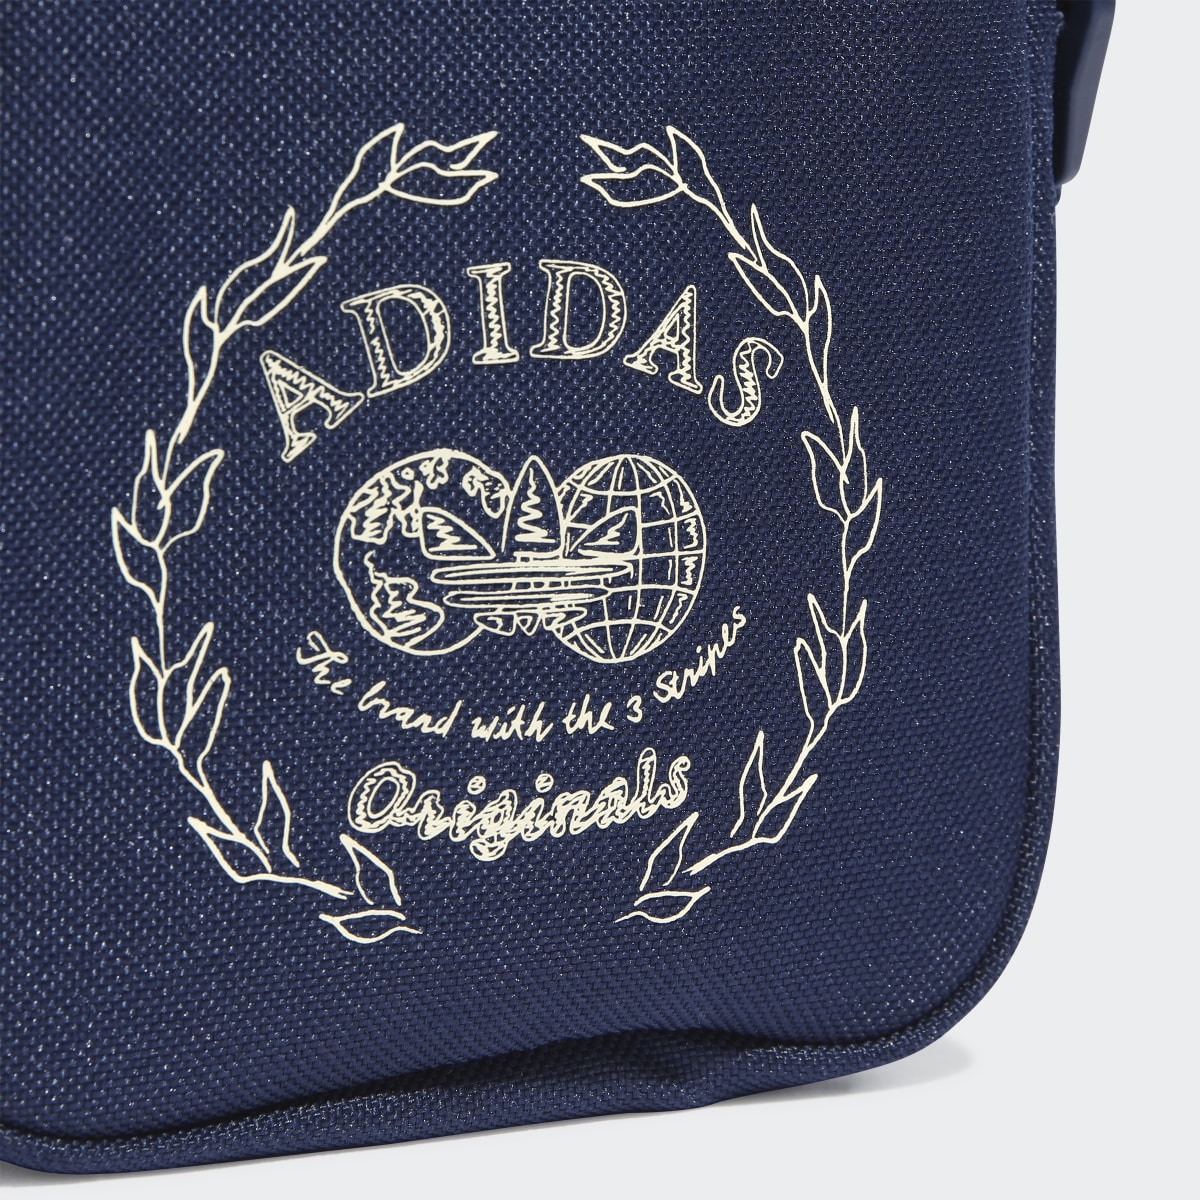 Adidas Hack the Archive Festival Tasche. 6